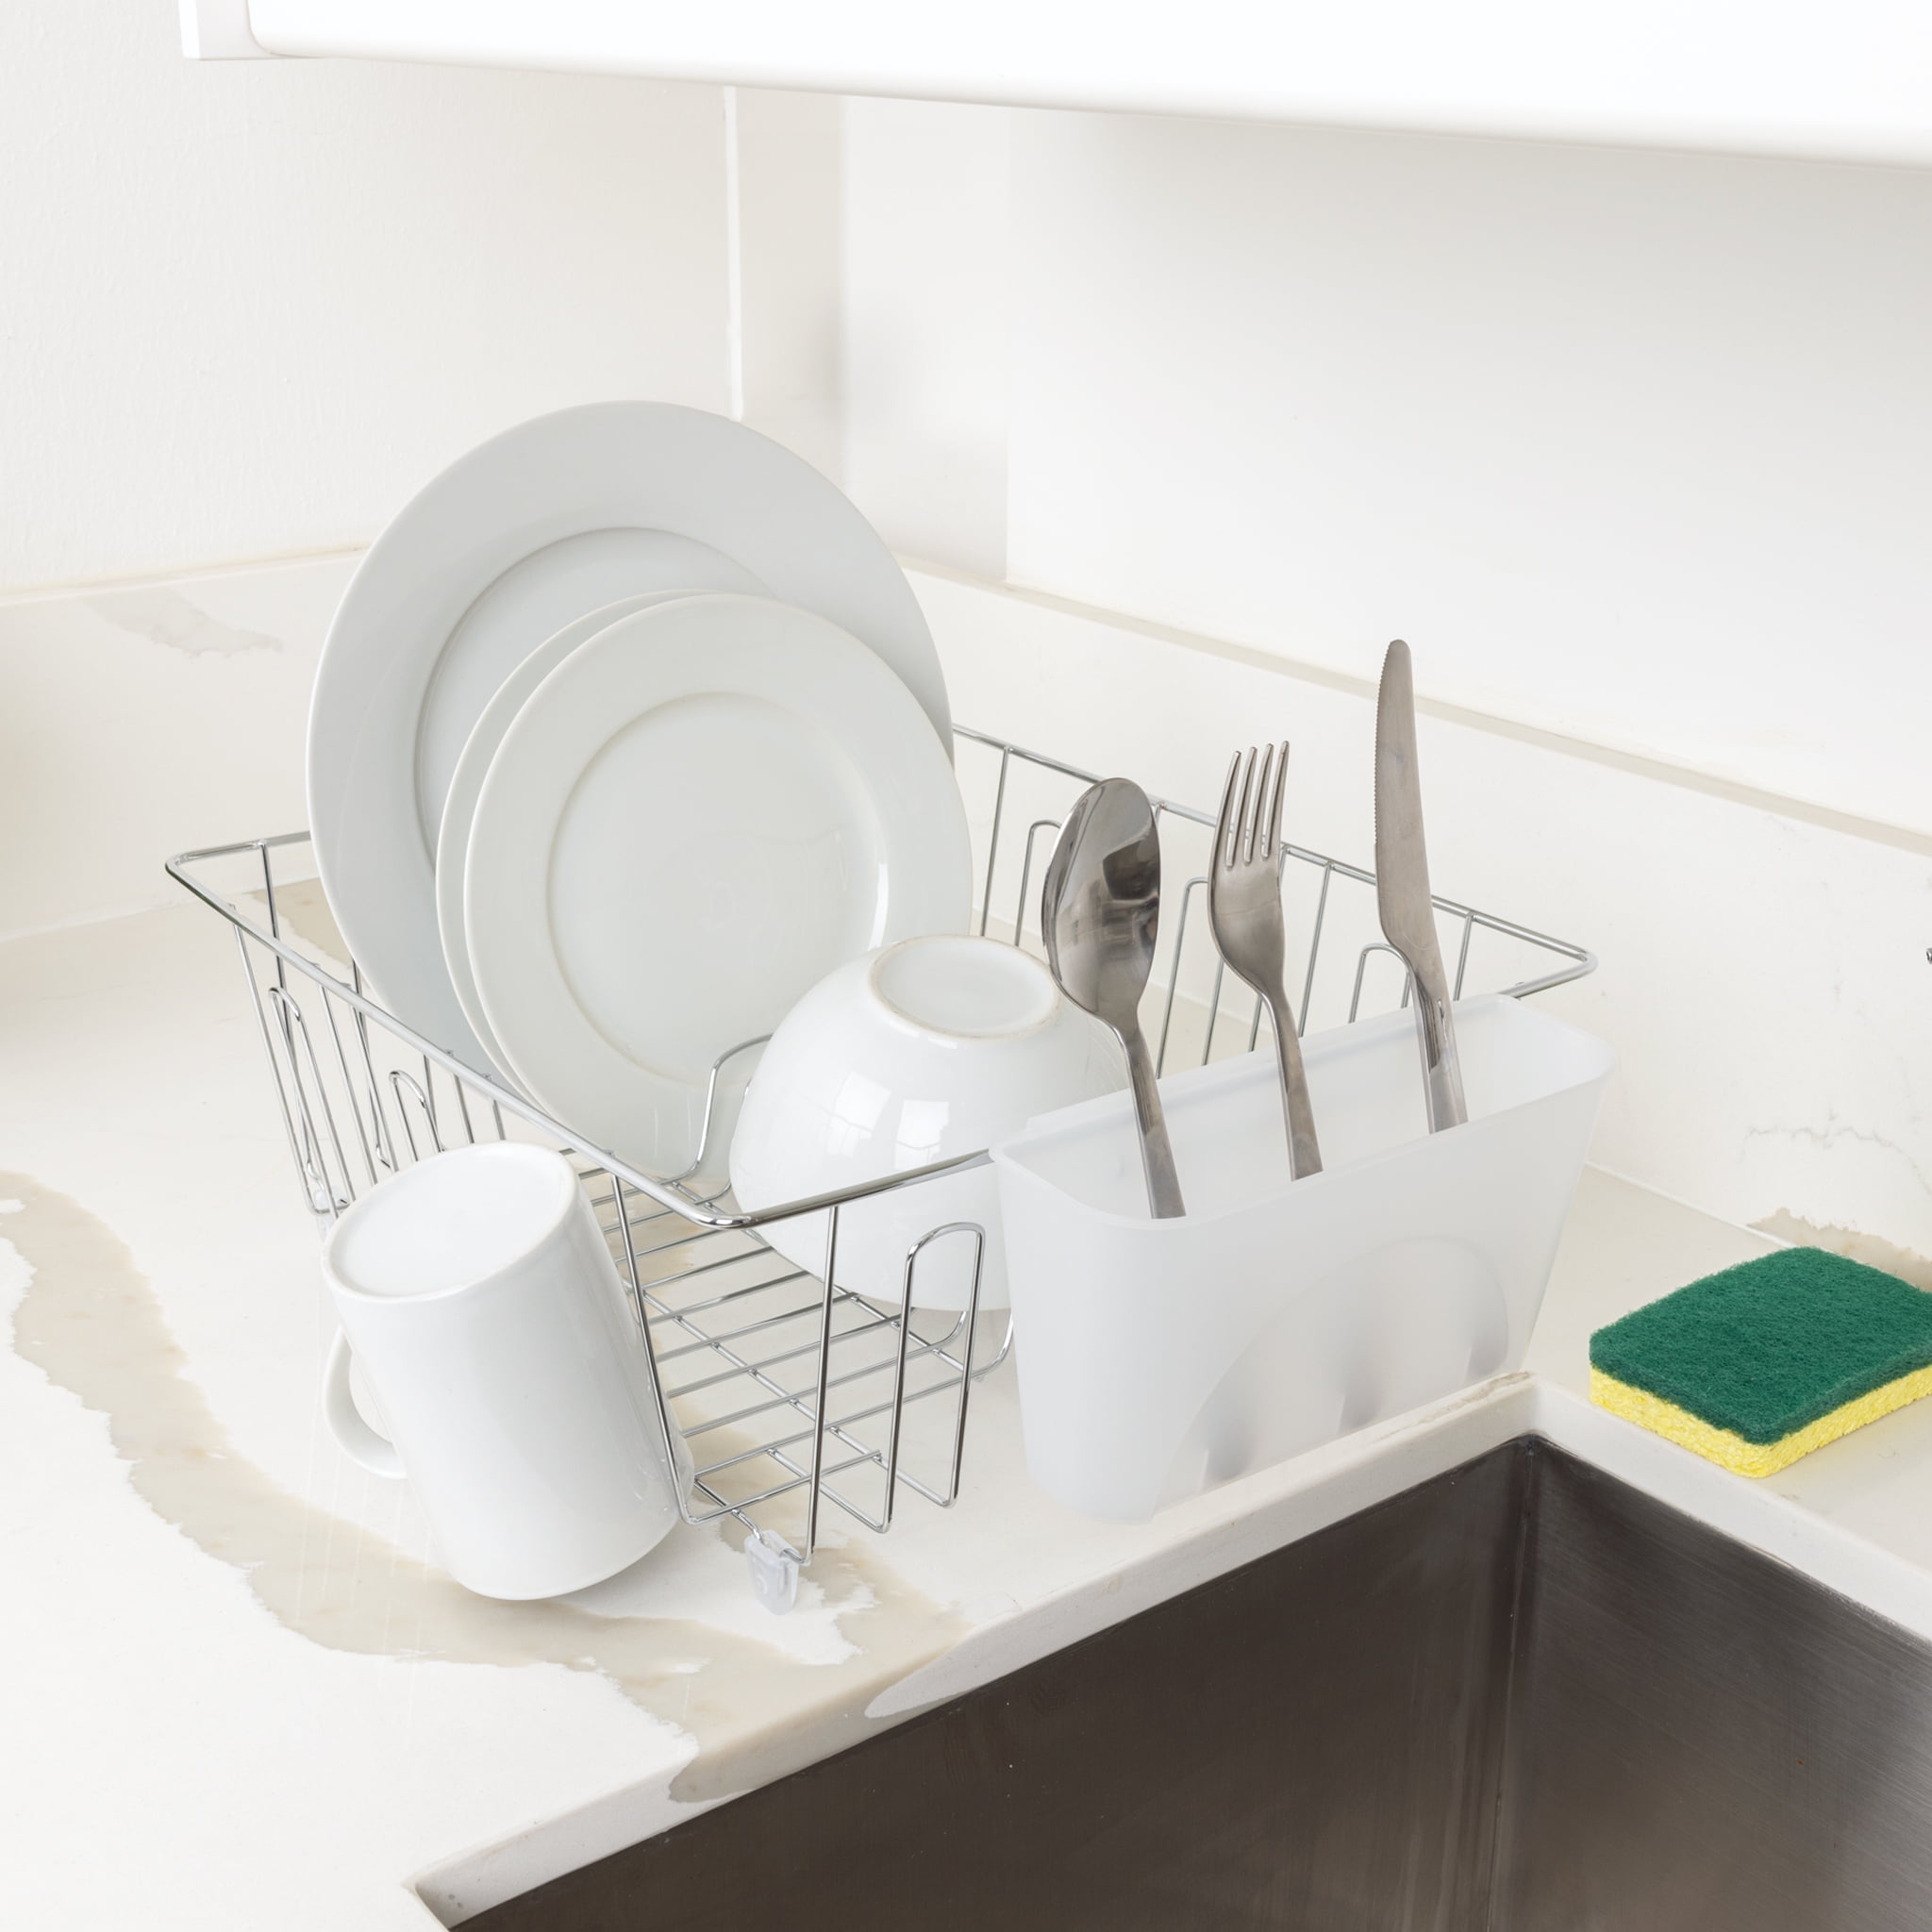 This Slim Dish Rack Is Perfect for My Tiny Kitchen (It's Only $17